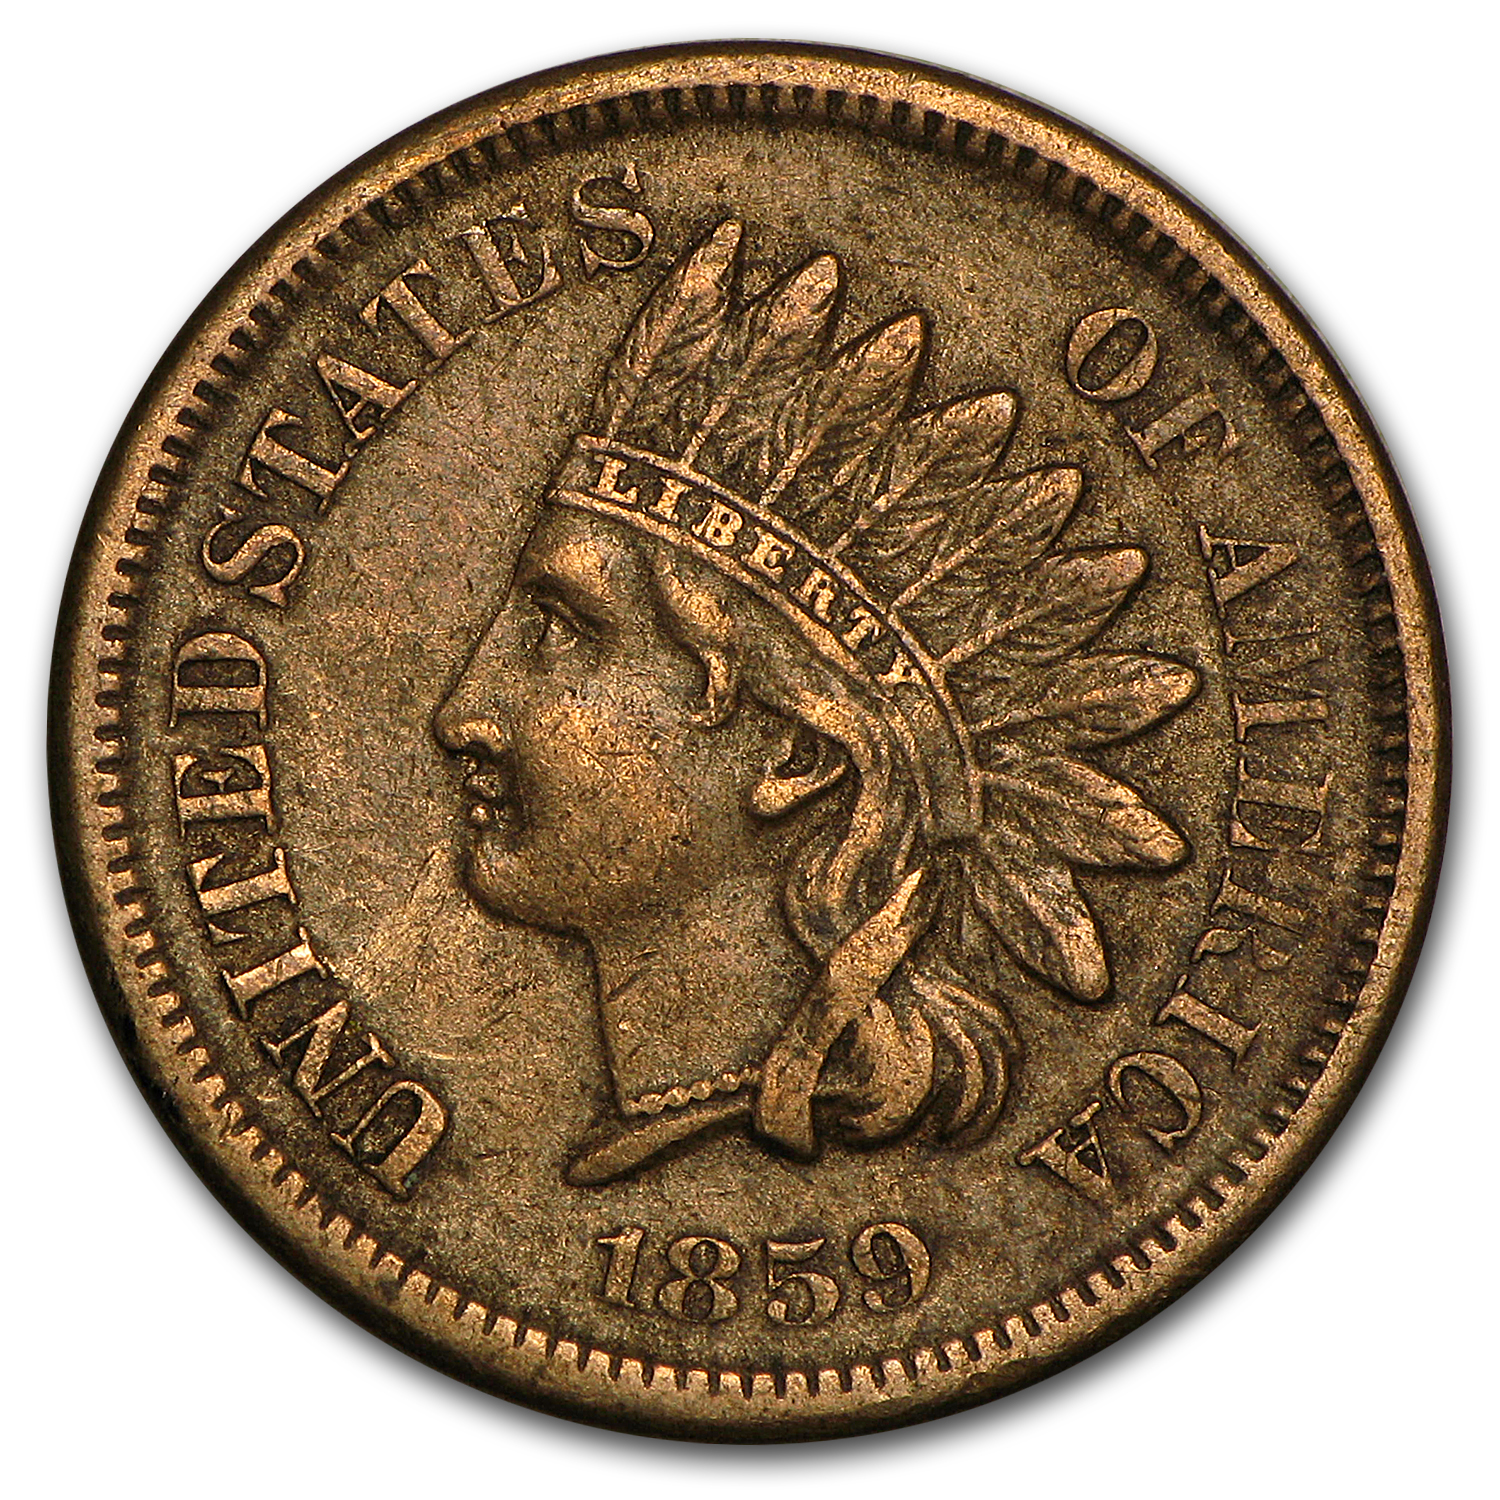 Buy 1859 Indian Head Cent VF